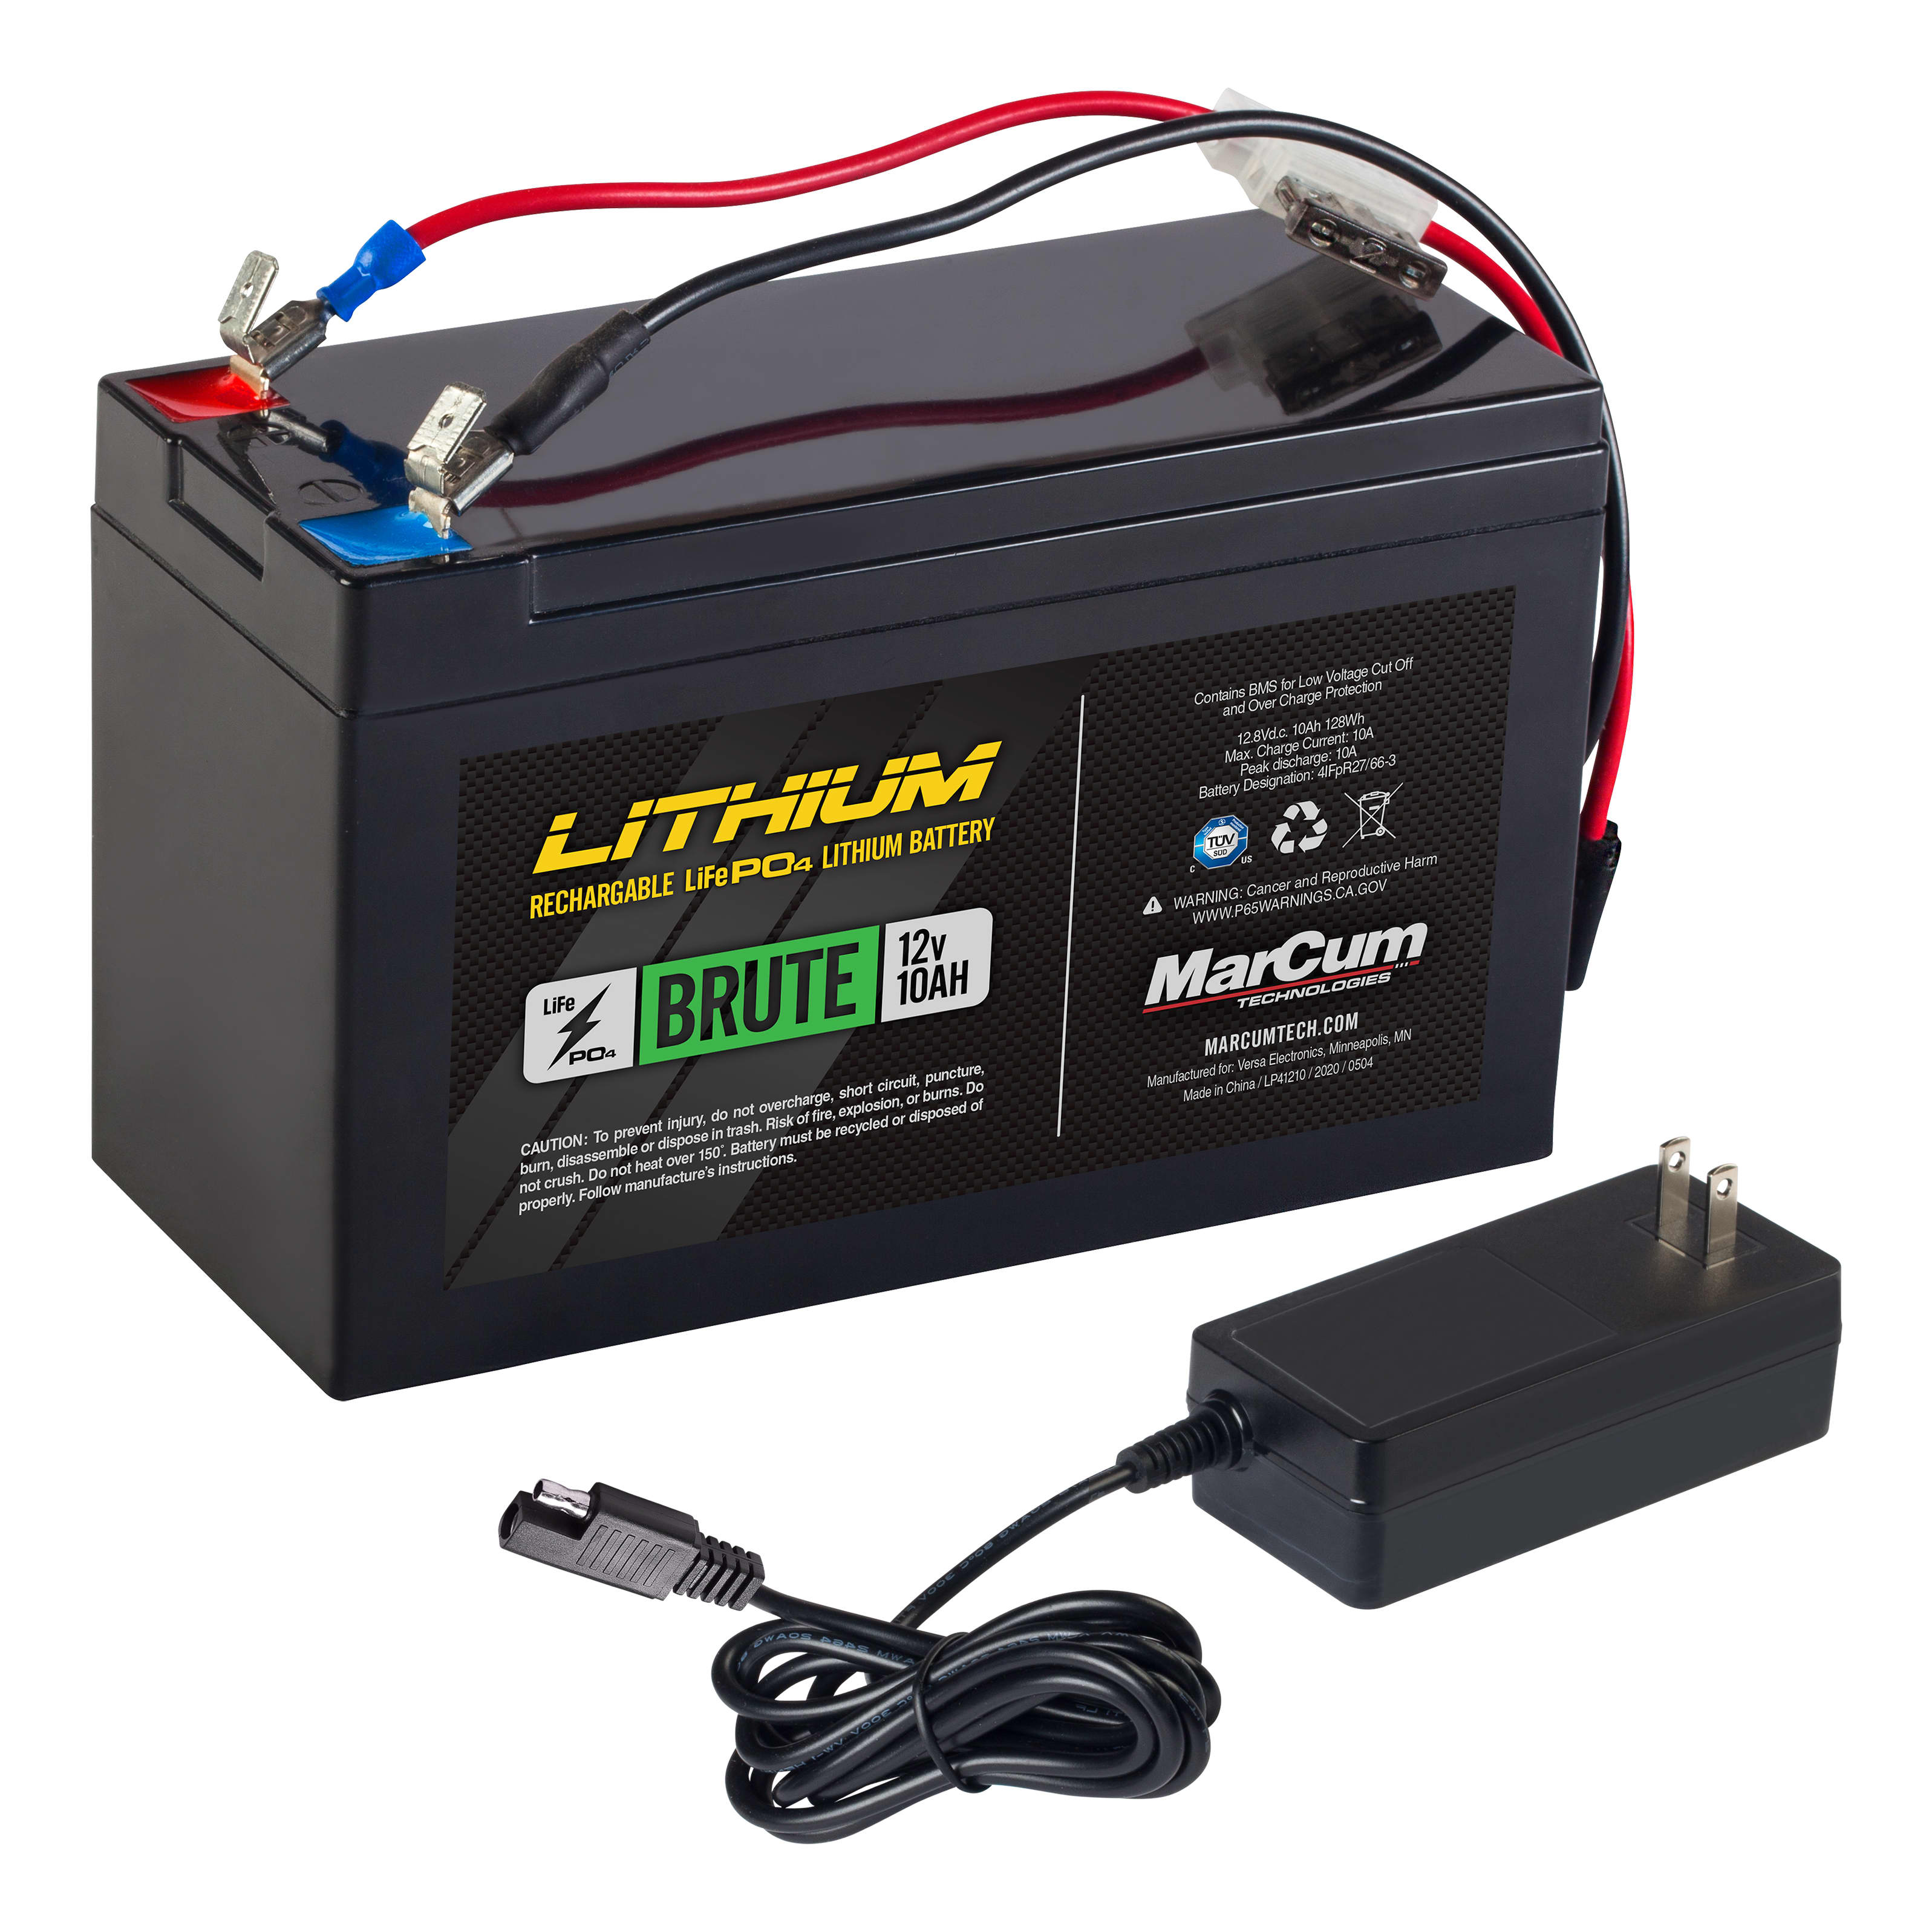 MarCum® Brute 12V10AH Lithium Battery with Charger